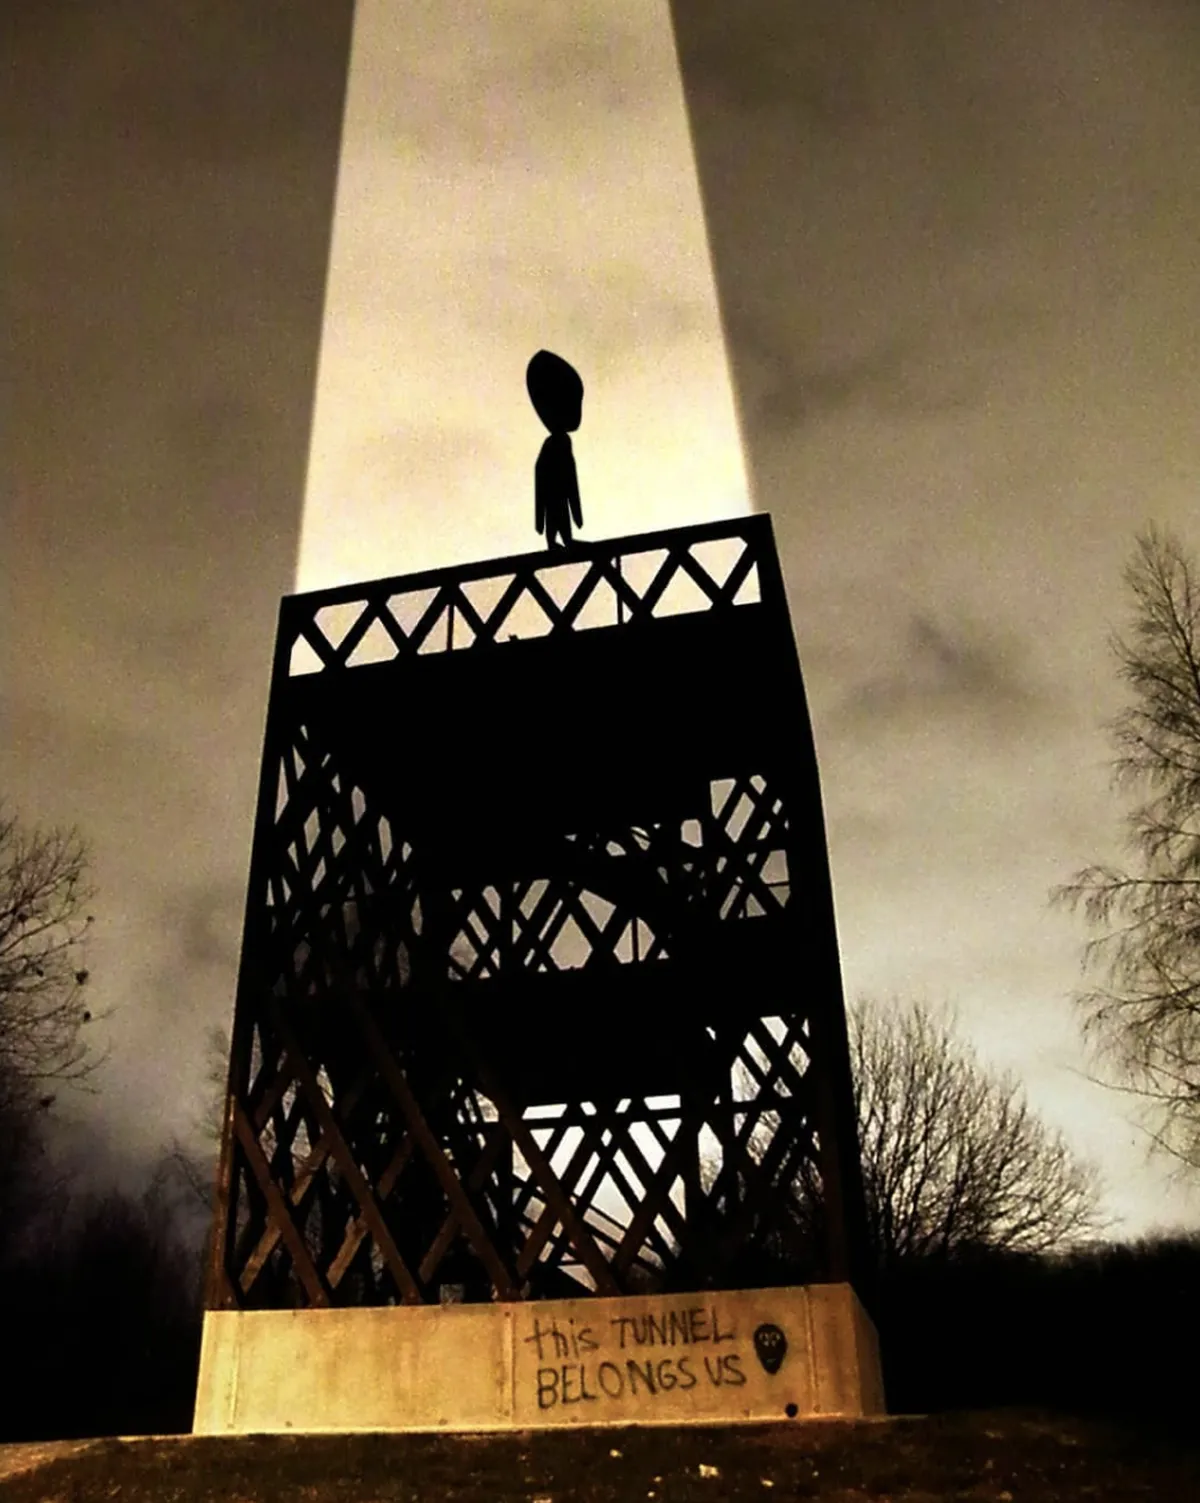 I was walking to Kopli (district in Tallinn) on that night and saw unusual man tagging to observation tower concrete. When it saw me, it quickly climbed up and waslifted up to sky (photo is reconstructed). I still feel a bit odd after that incident.